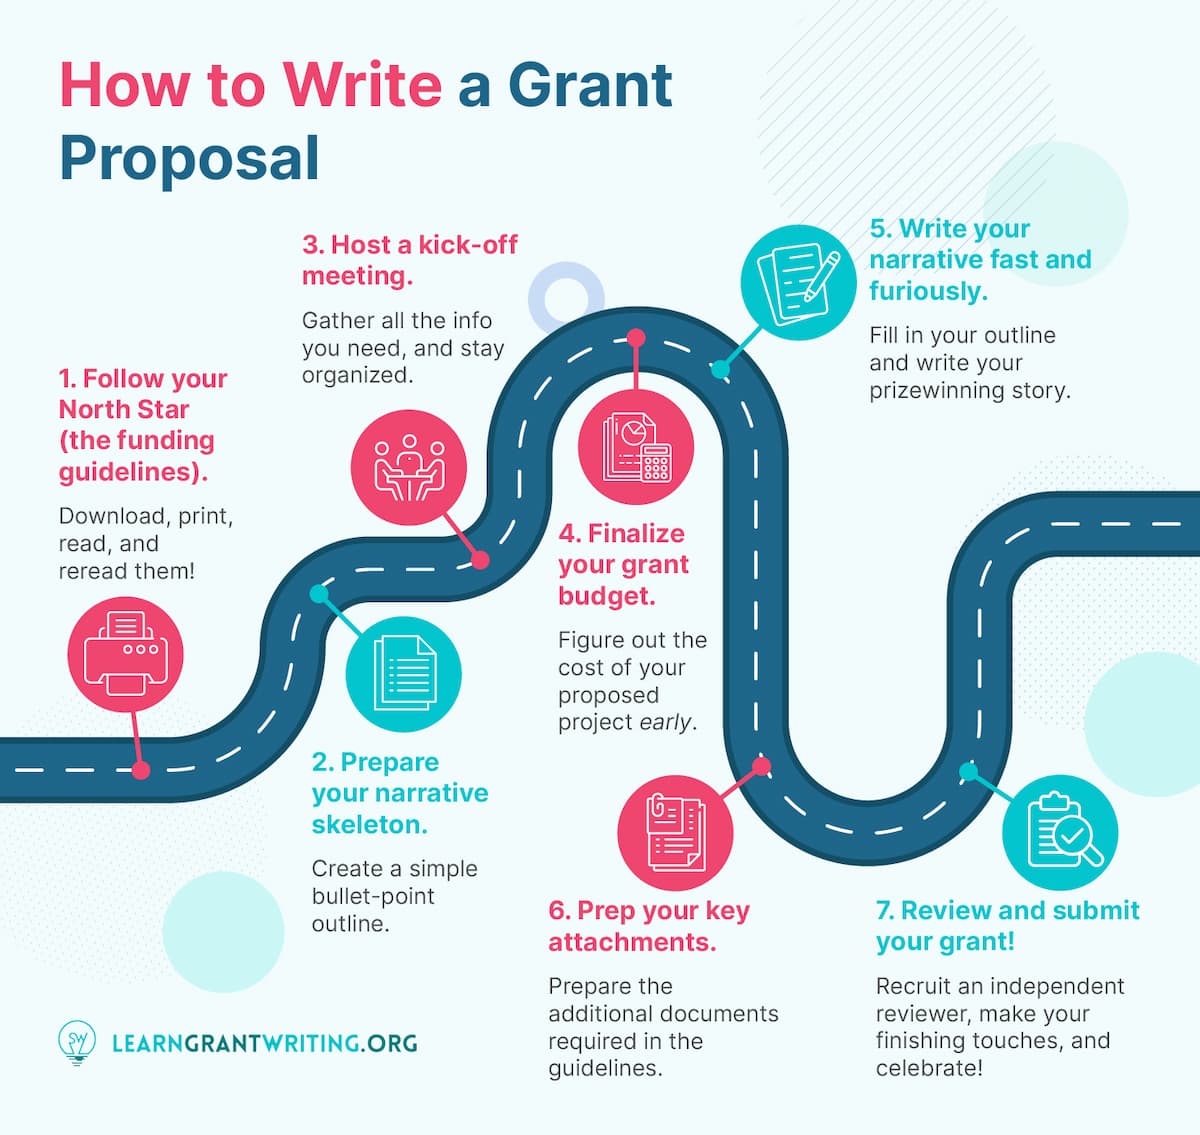 The fundamental steps of writing a grant proposal, detailed in the text below.